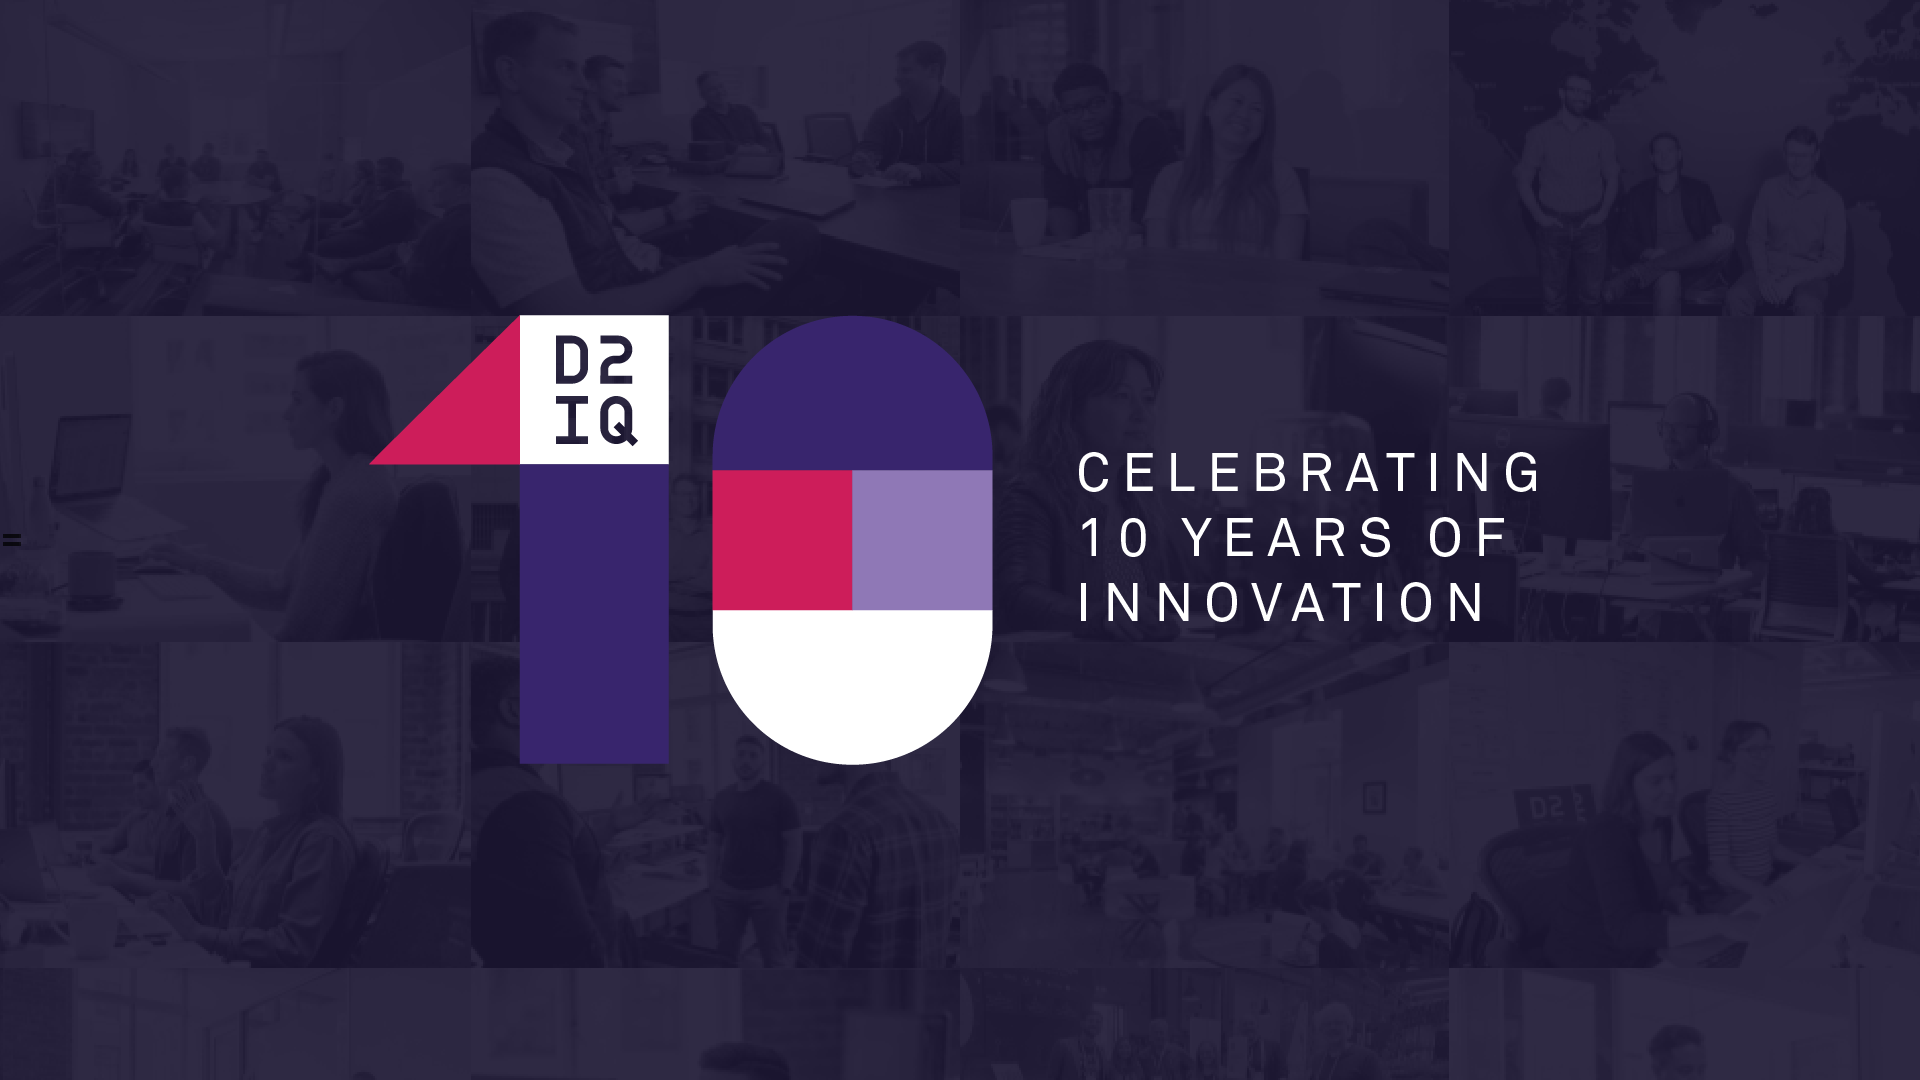 D2iQ Turns 10: A Decade of Innovation